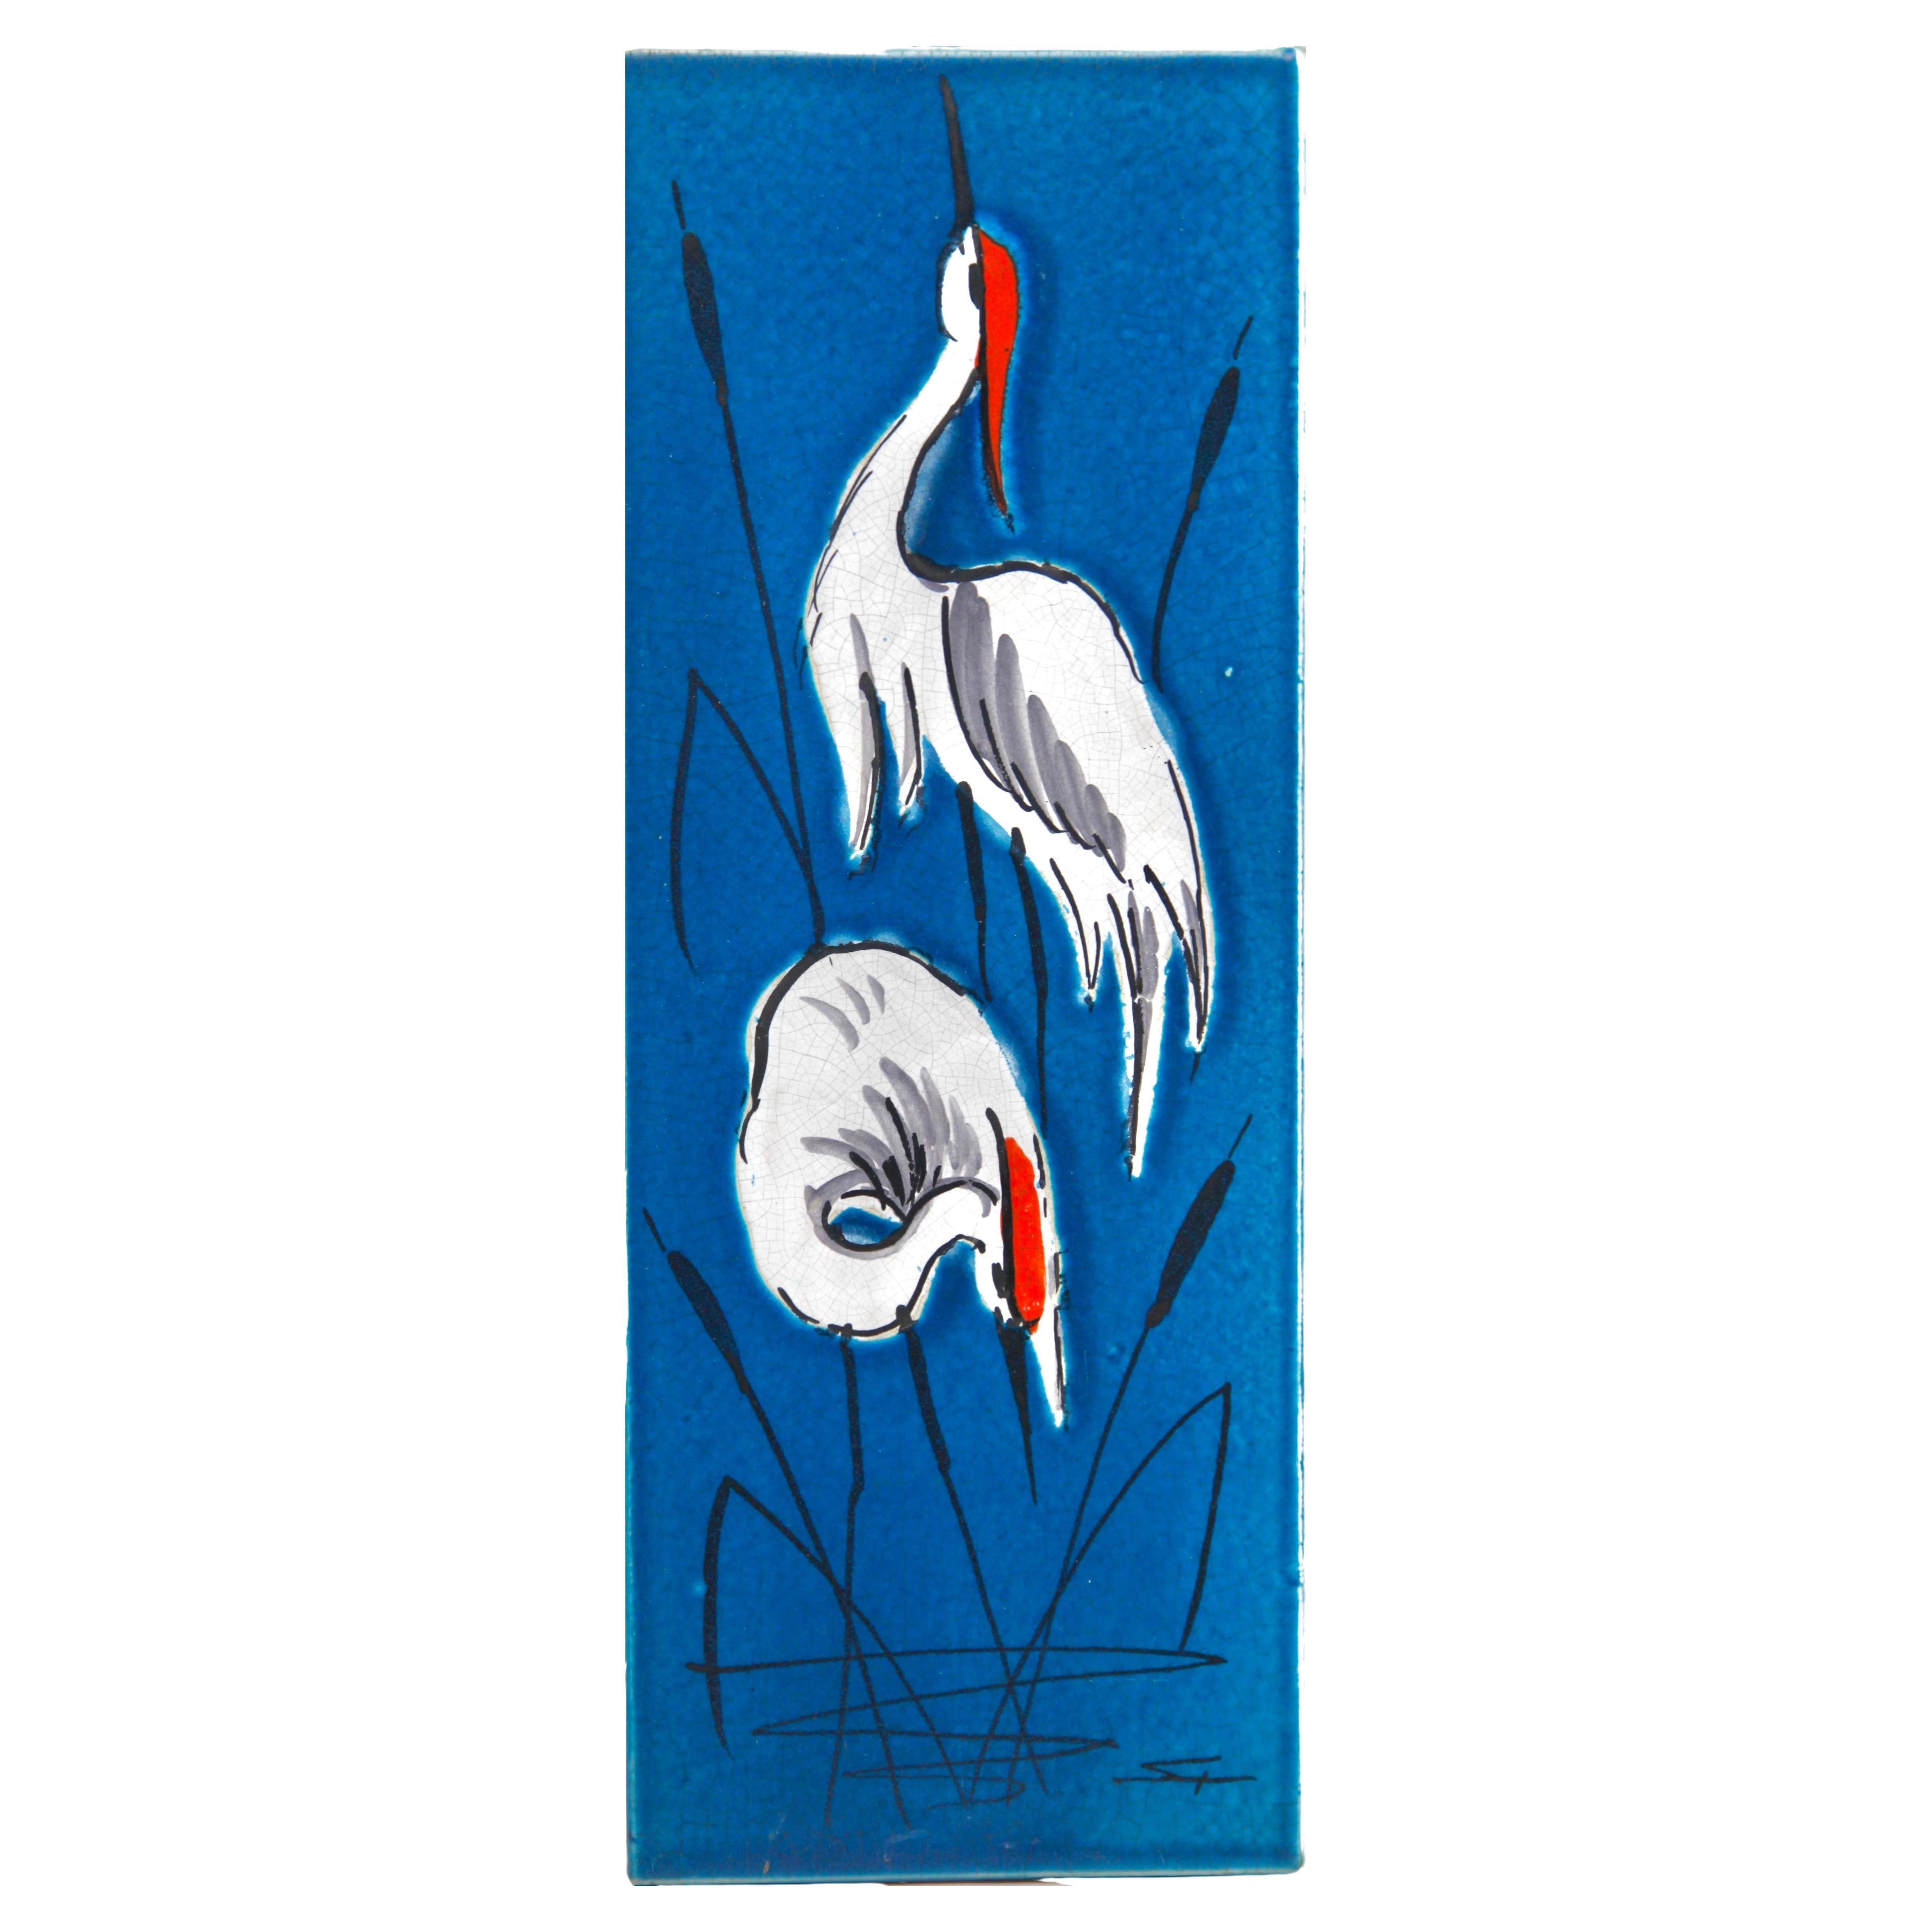 Rusha Wall Plaque, Glazed Ceramic, 'Image of Cranes' West Germany For Sale